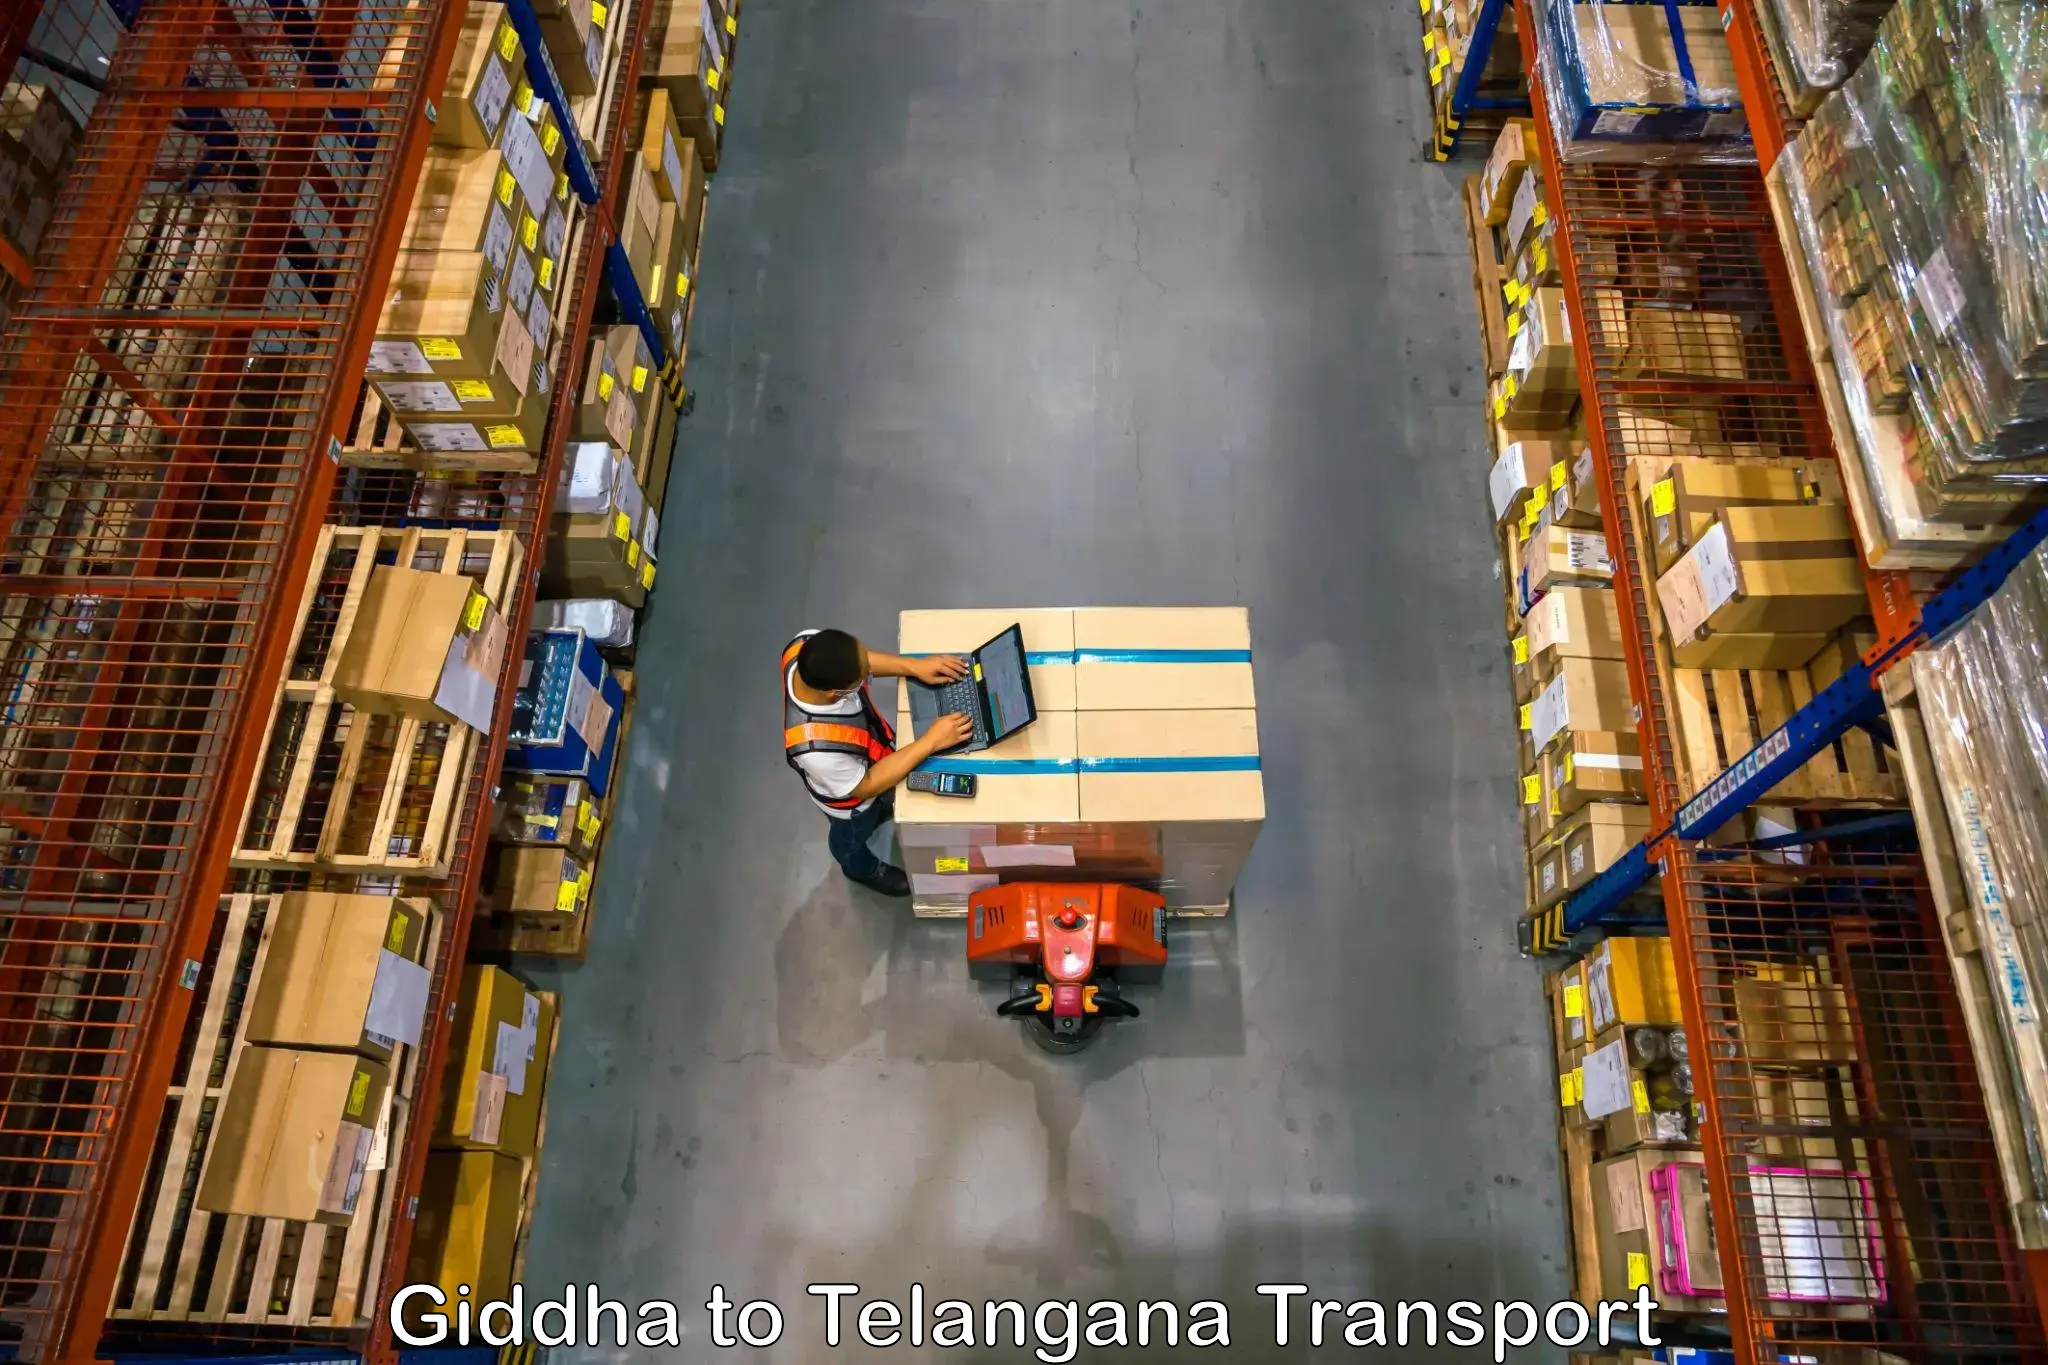 Part load transport service in India in Giddha to Nalgonda